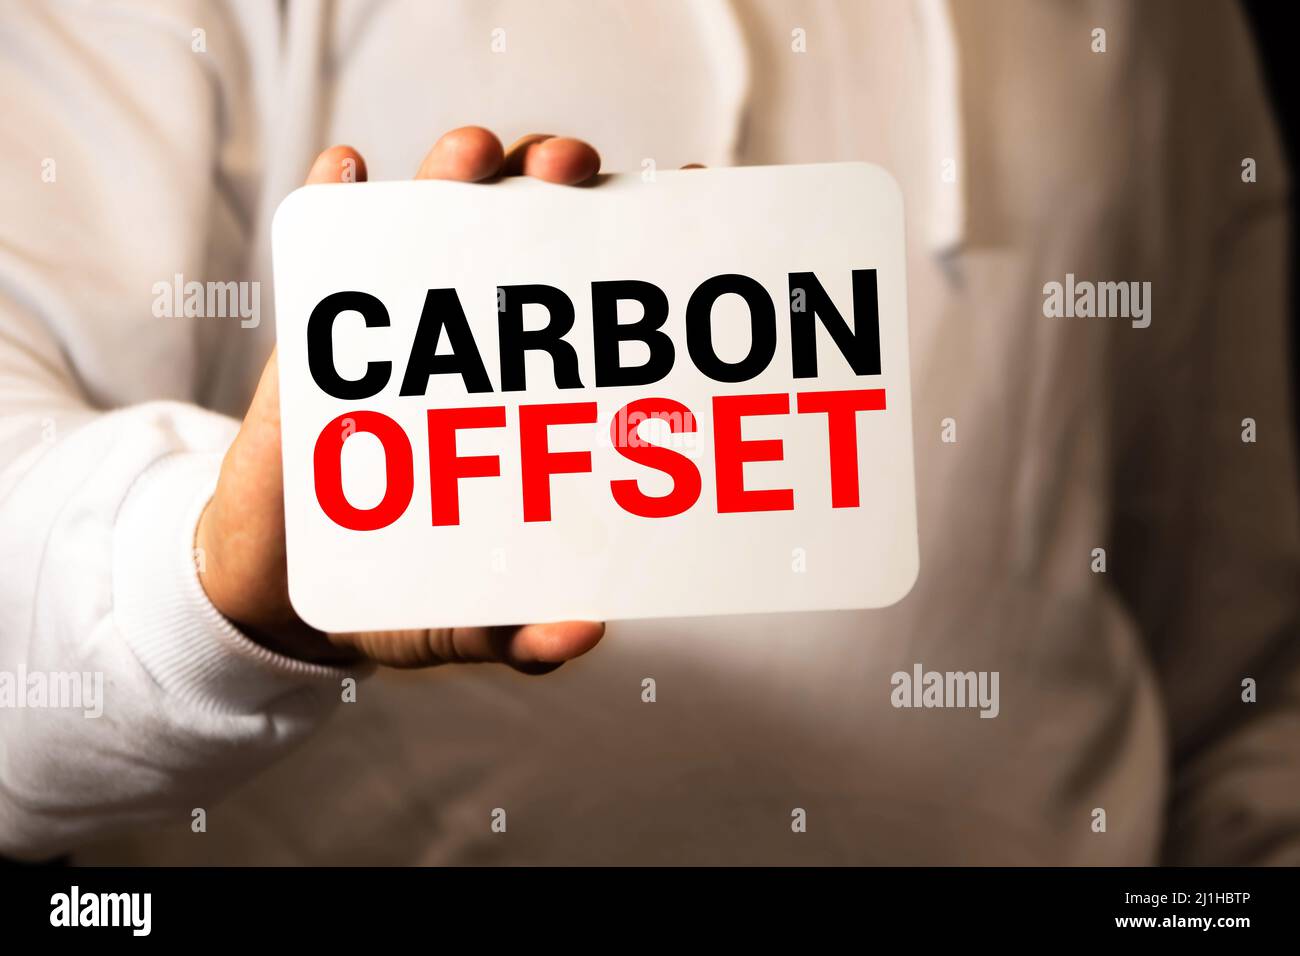 Word writing text Carbon Offset. Business concept for Reduction in emissions of carbon dioxide or other gases. Stock Photo